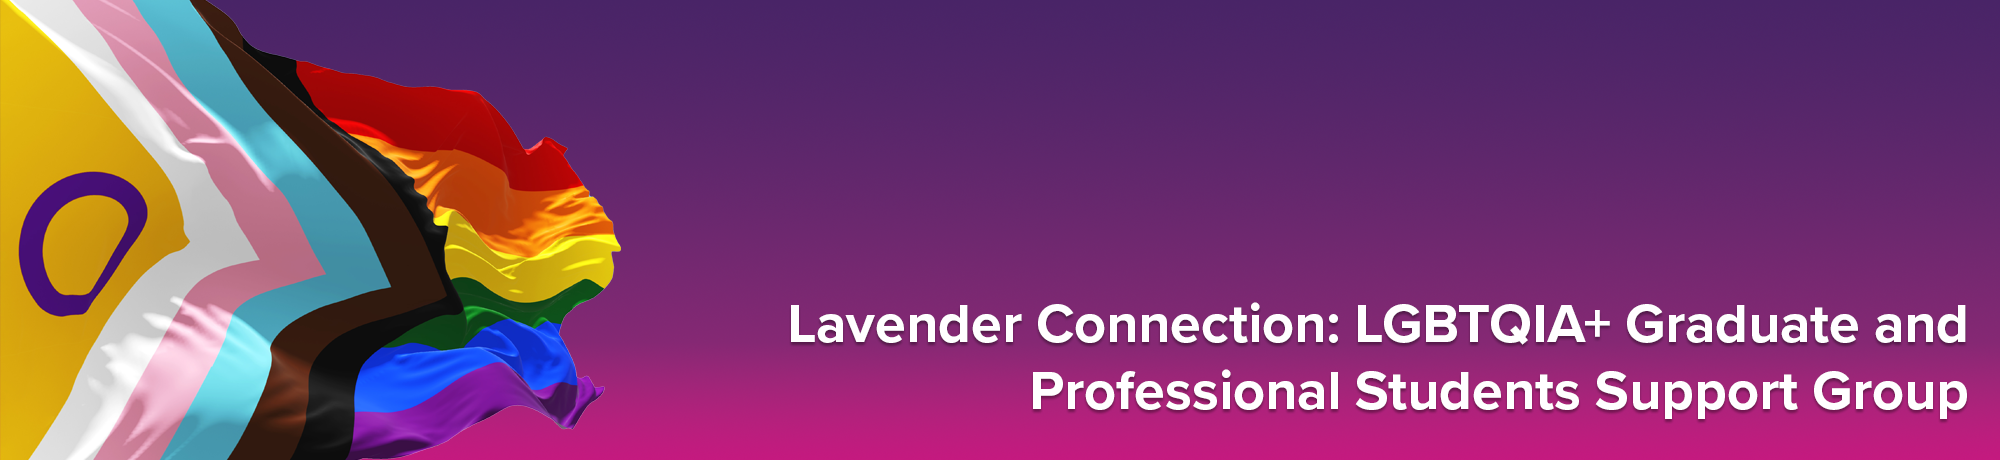 Lavender Connection: LGBTQIA+ Graduate and Professional Students Support Group